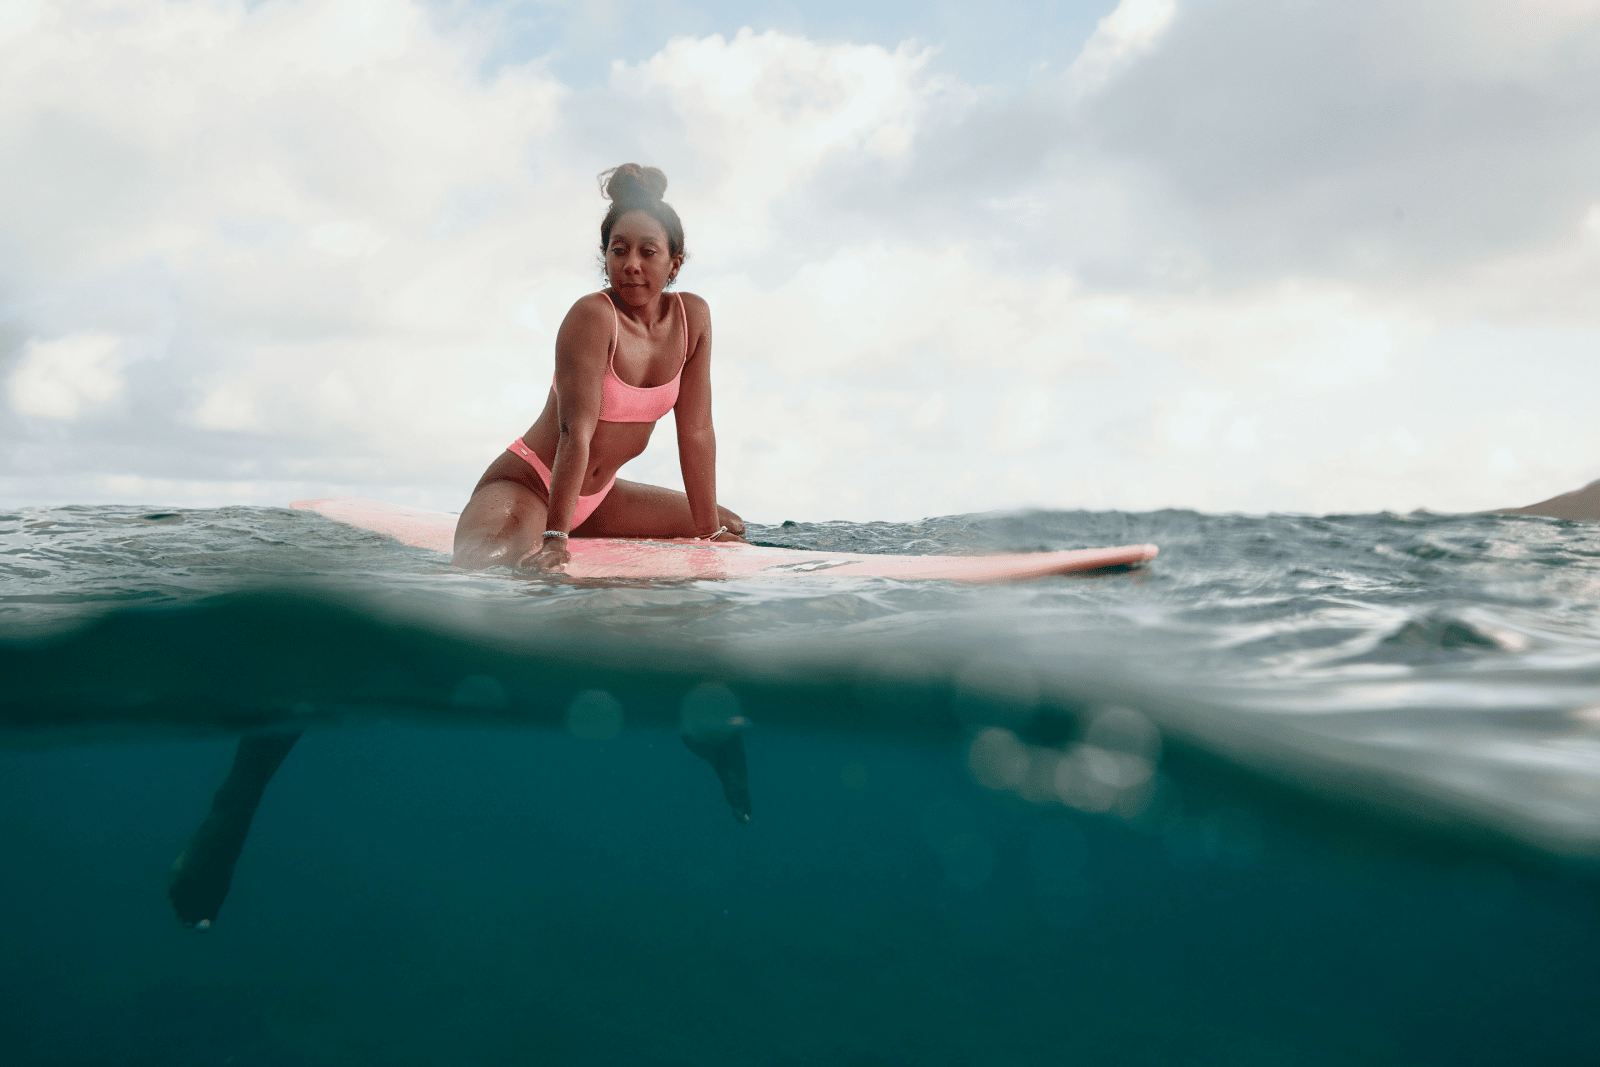 Is it OK to surf alone?